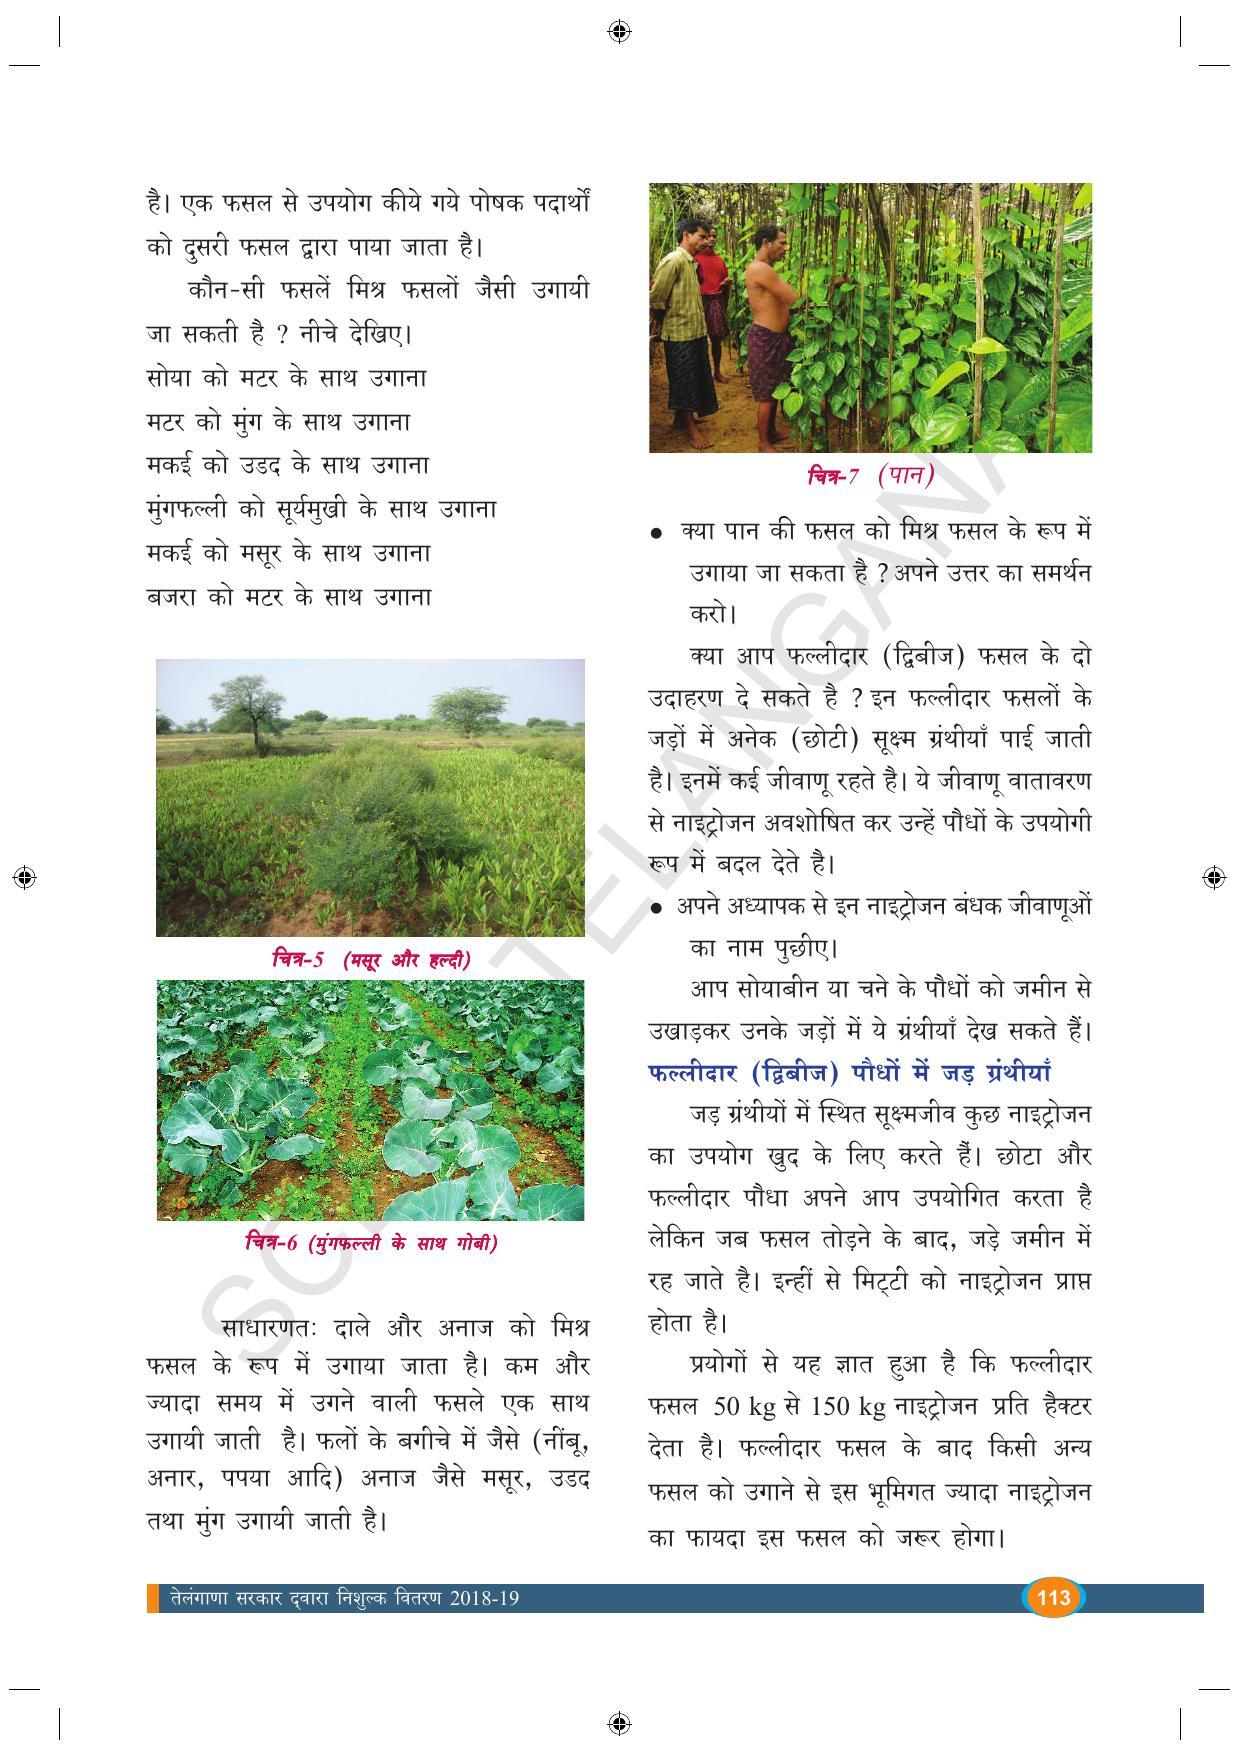 TS SCERT Class 9 Biological Science (Hindi Medium) Text Book - Page 125